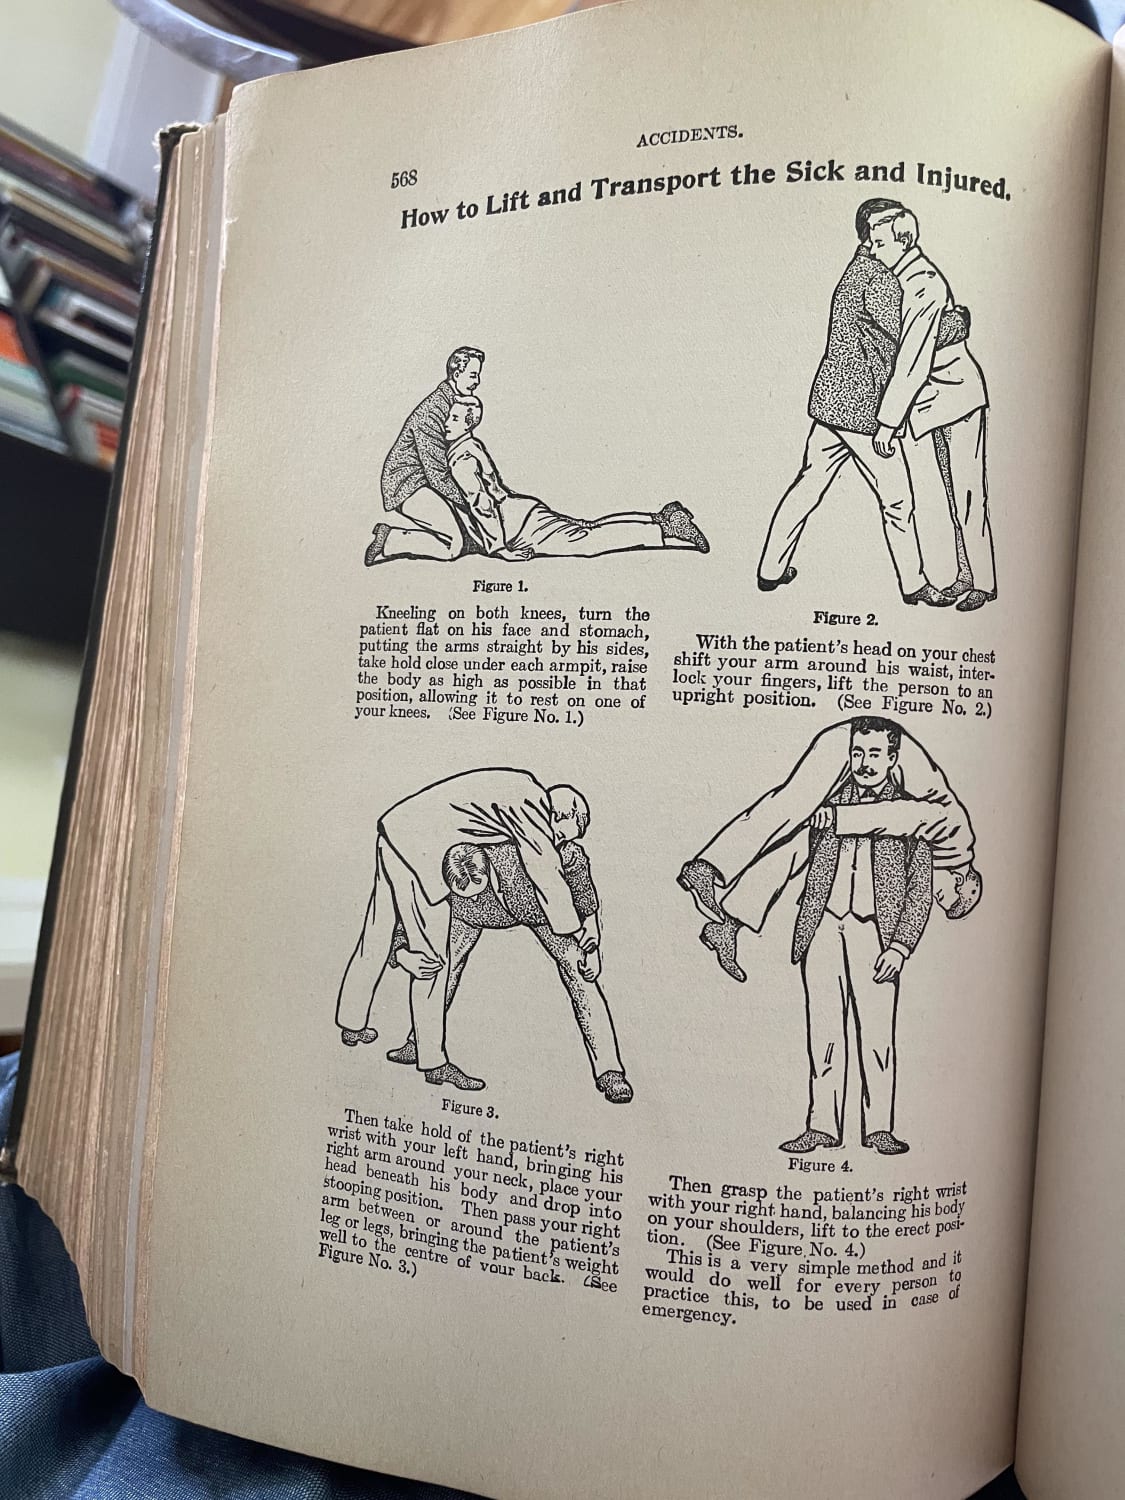 How to pick up a sick person—from a 1920s home medicine book